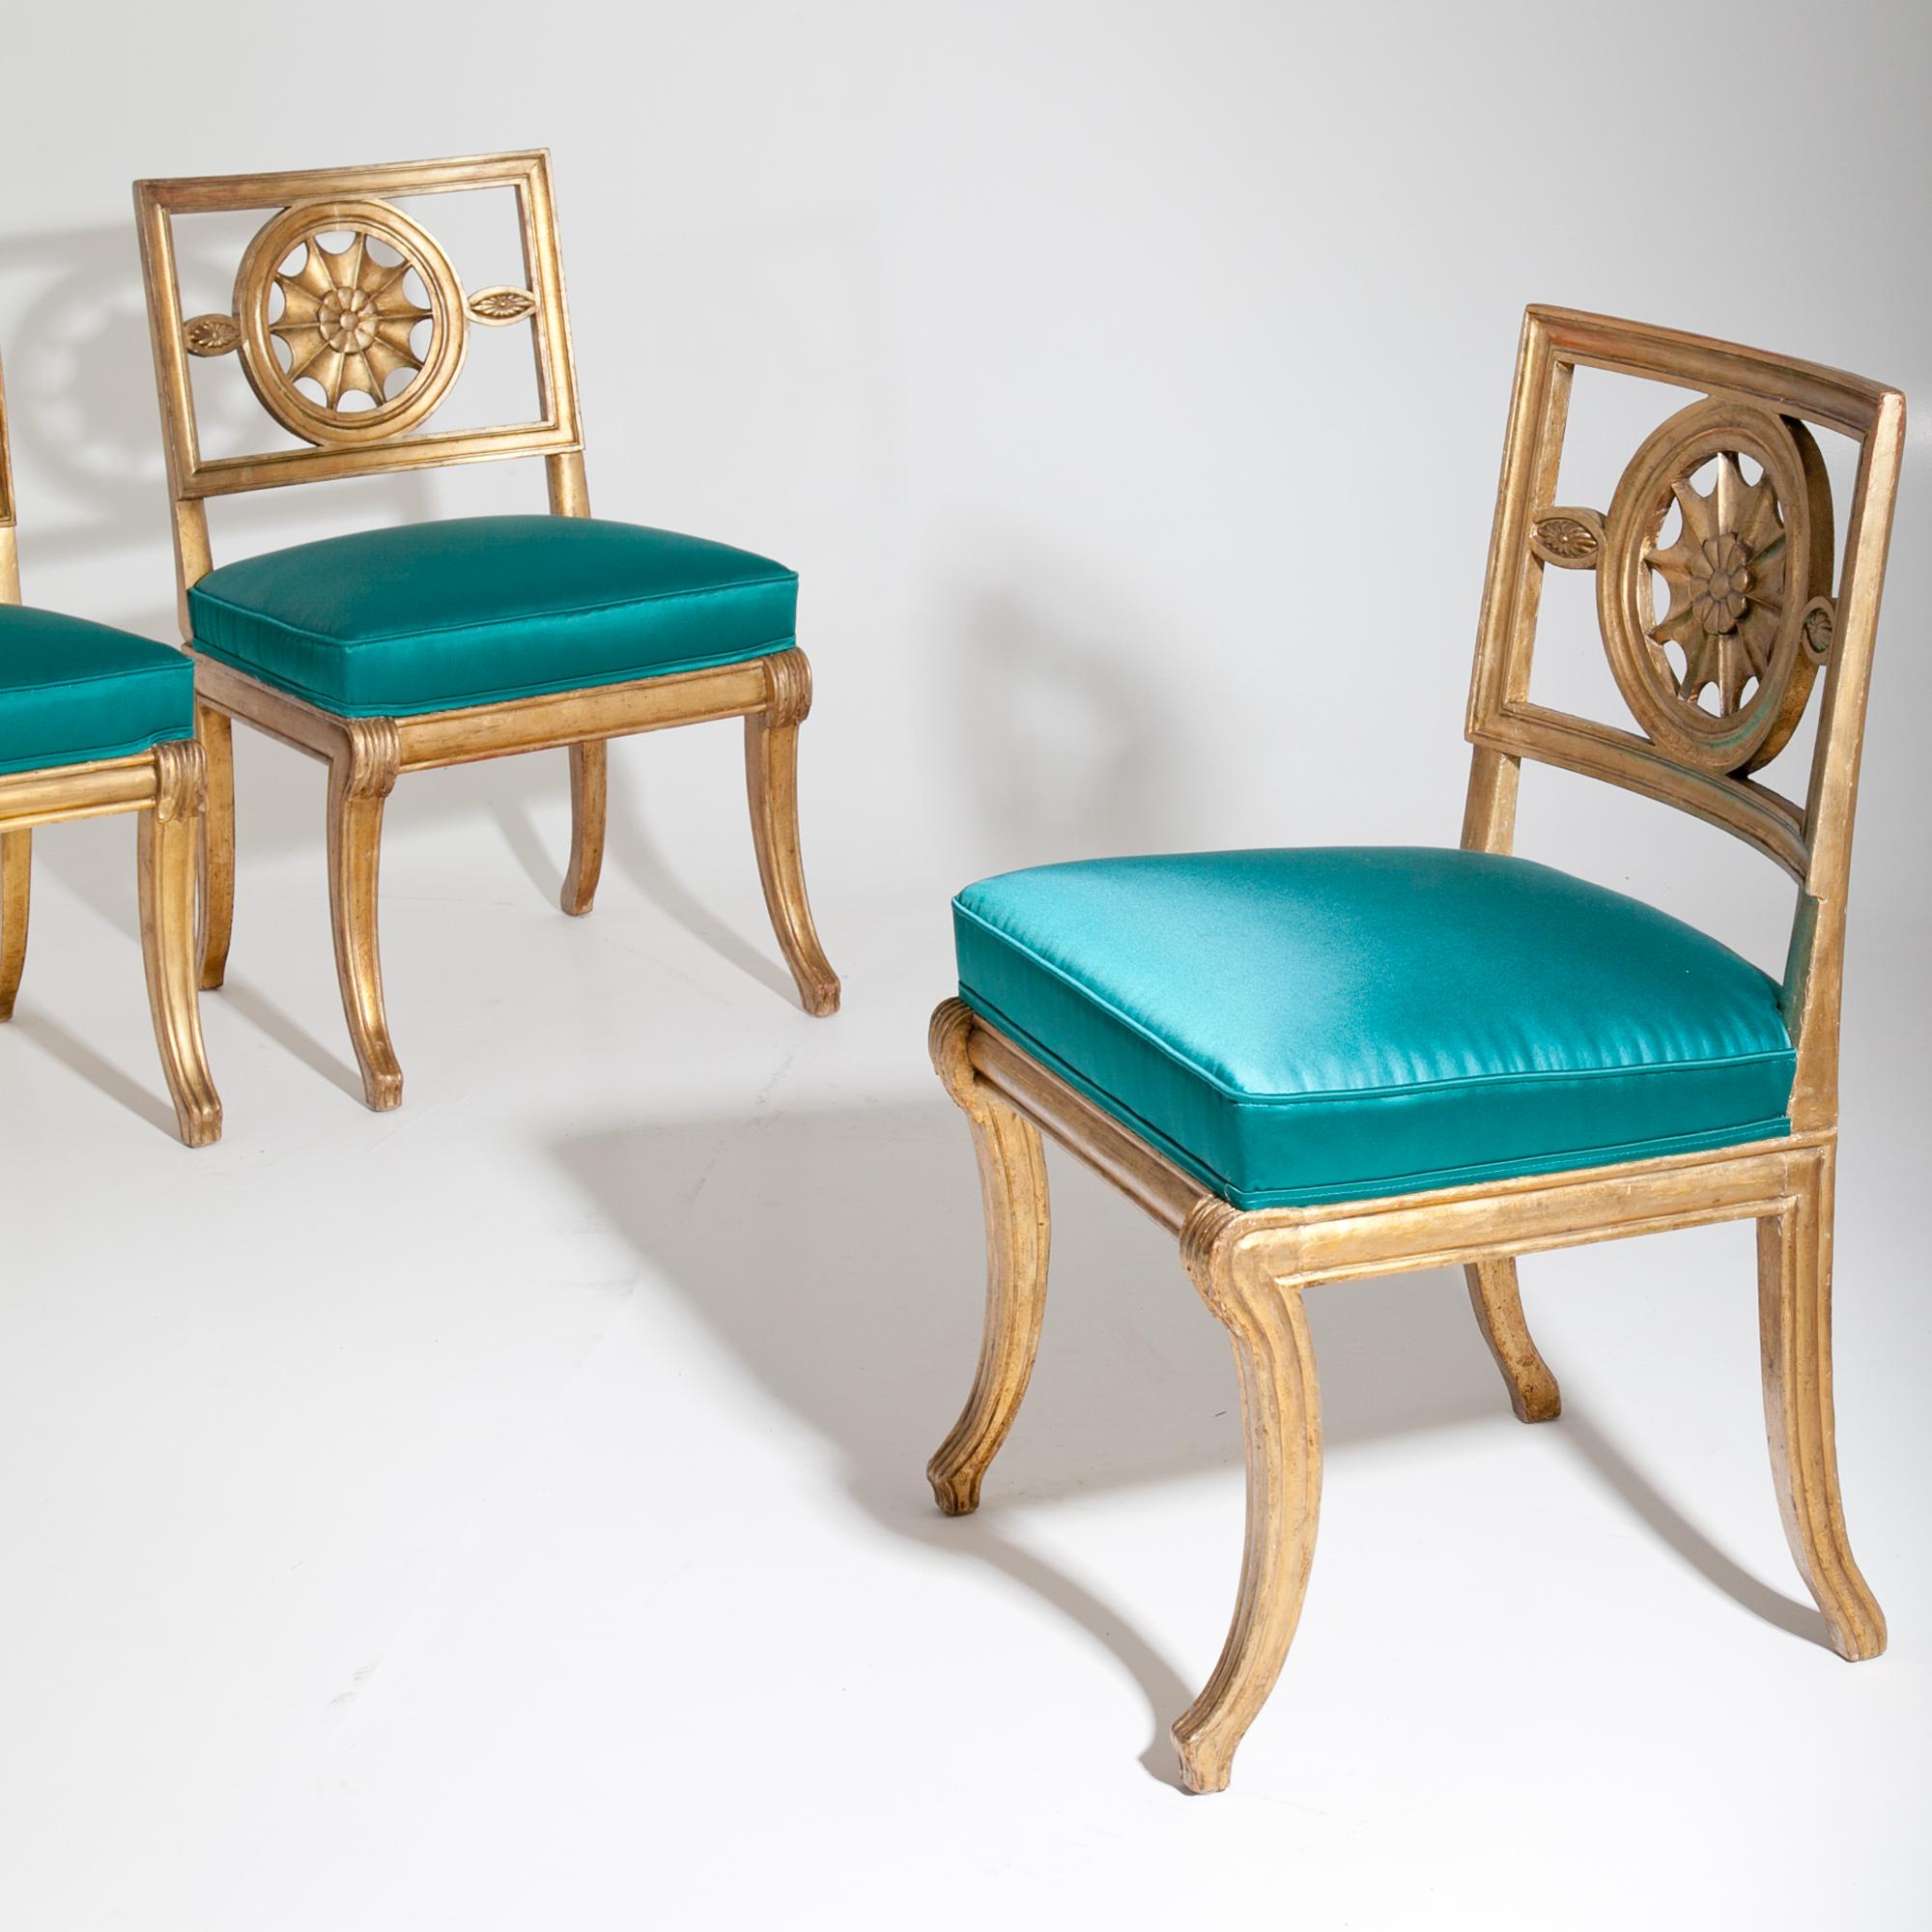 Wood Neoclassical Chairs, Berlin First Half of the 19th Century